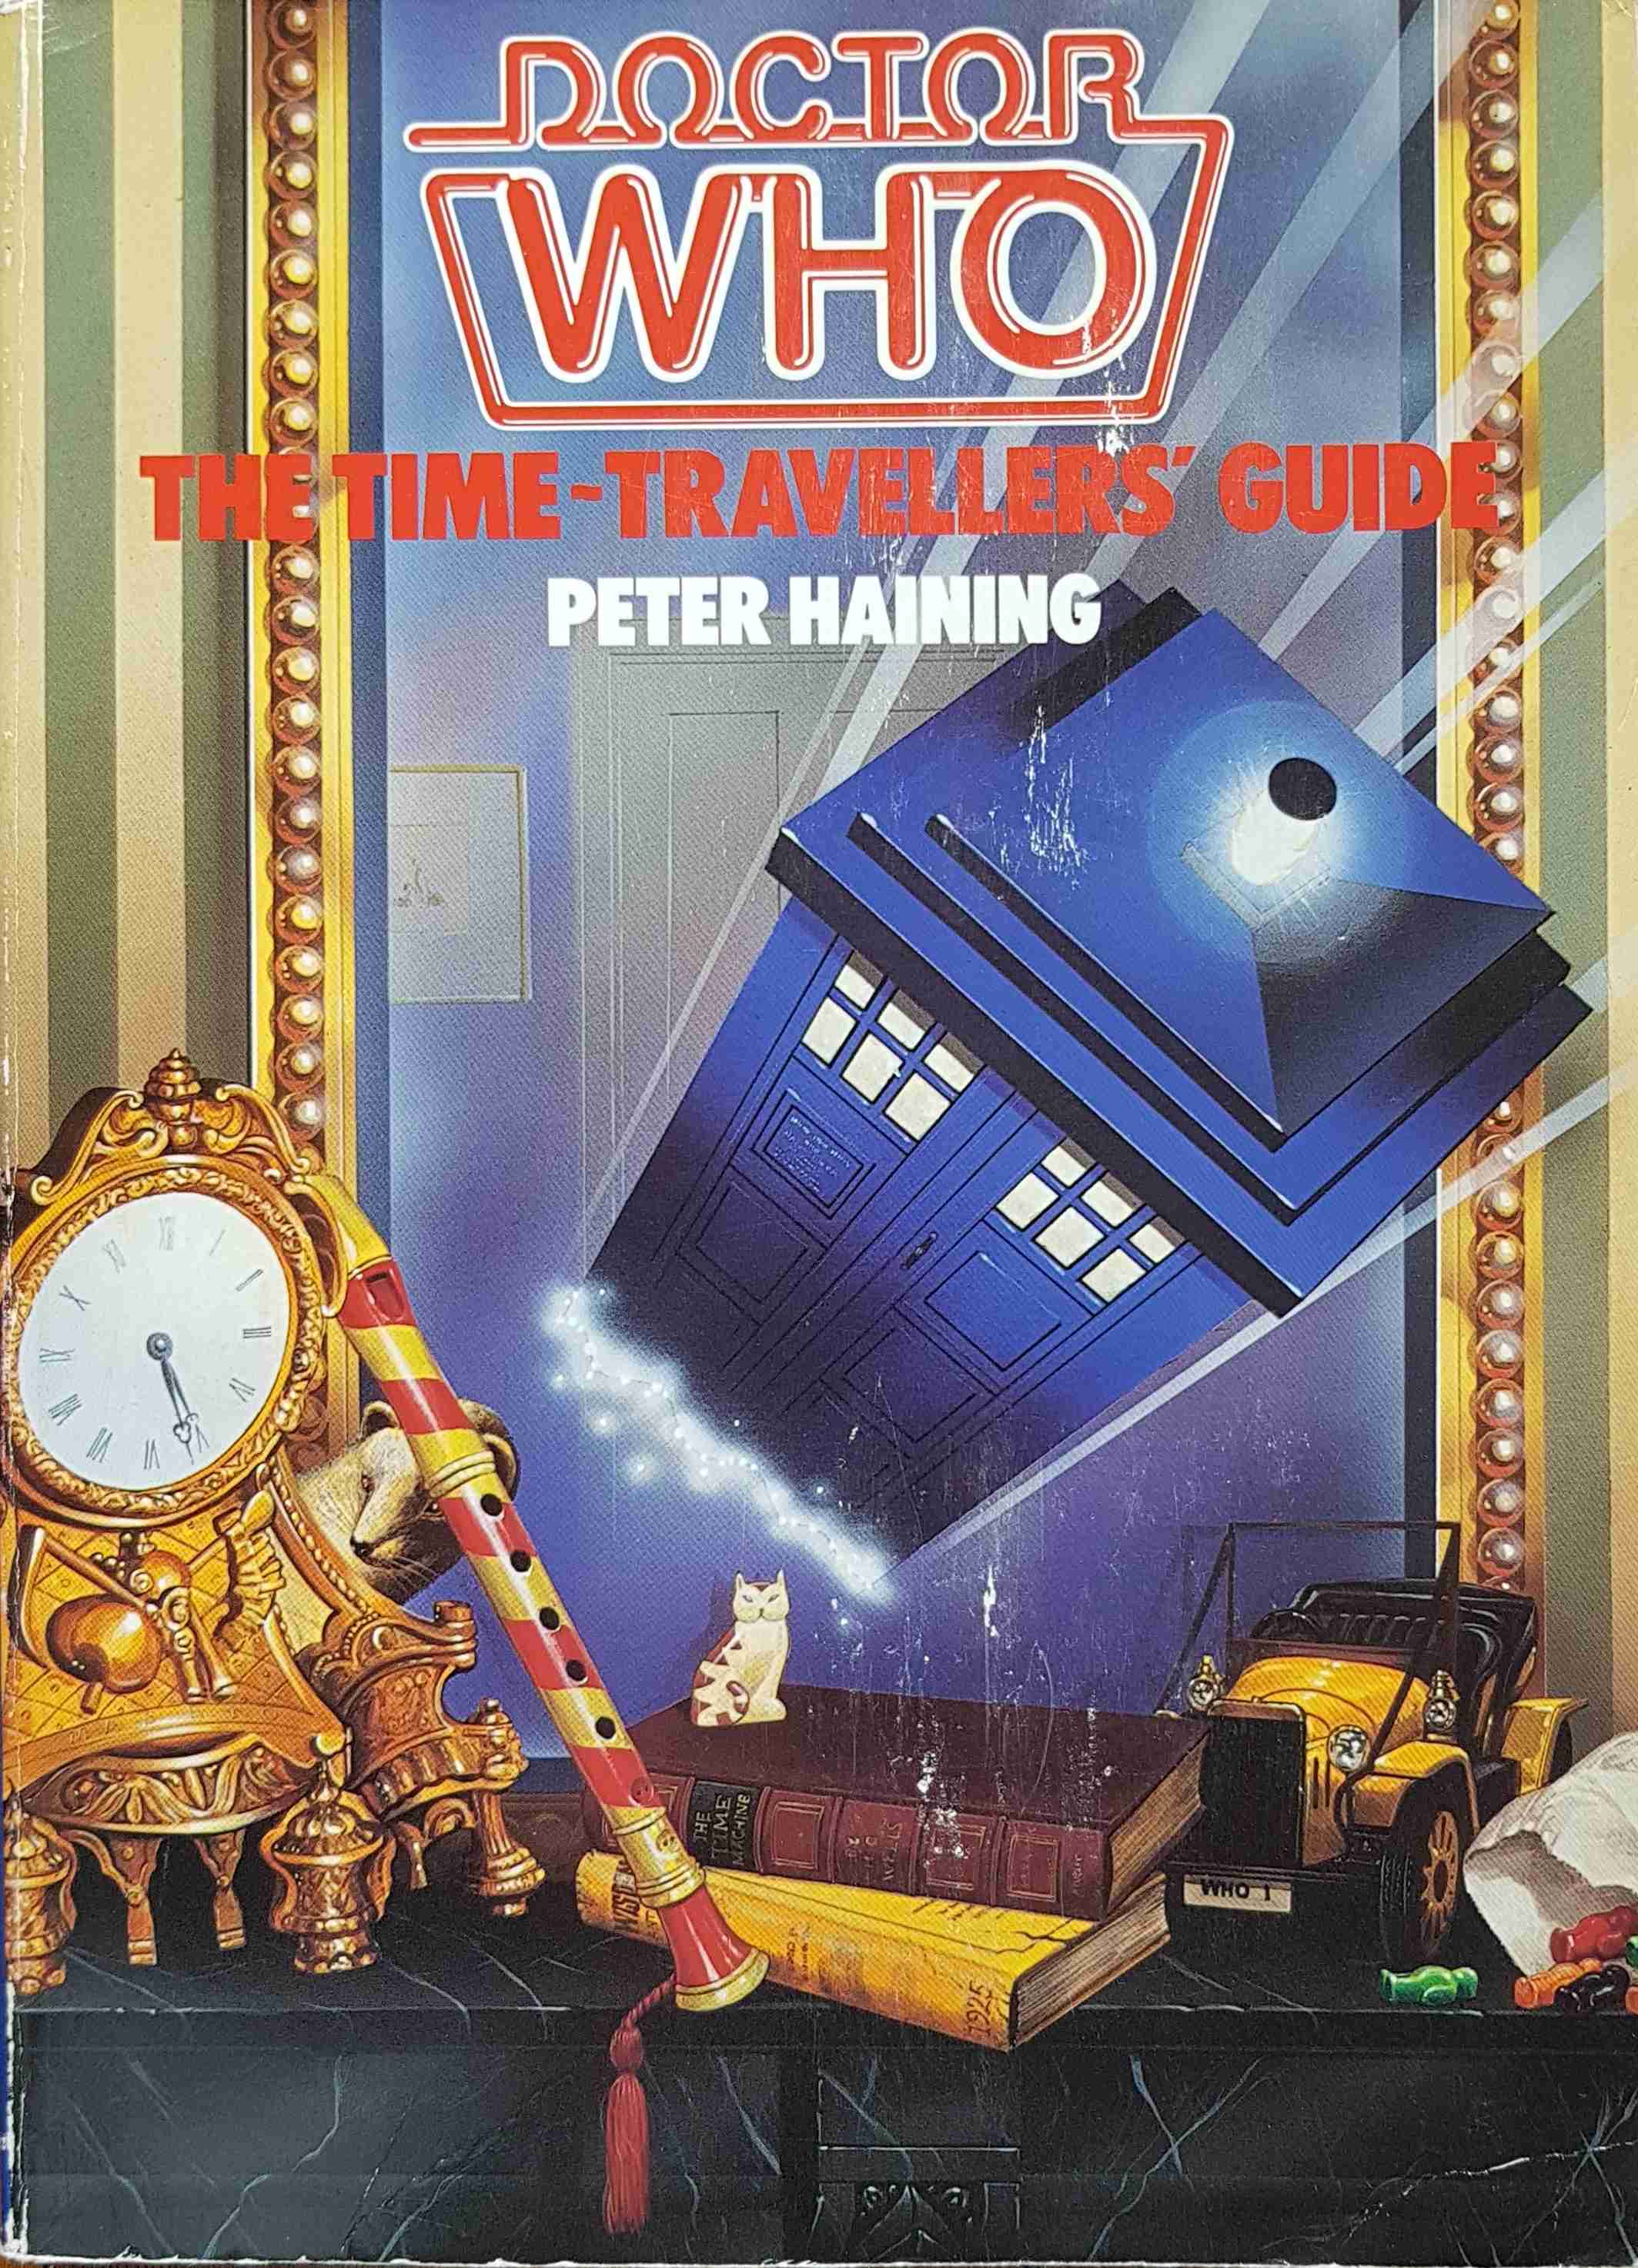 Picture of 0-86379-188-3 Doctor Who - The time travellers\' guide by artist Peter Haining from the BBC records and Tapes library